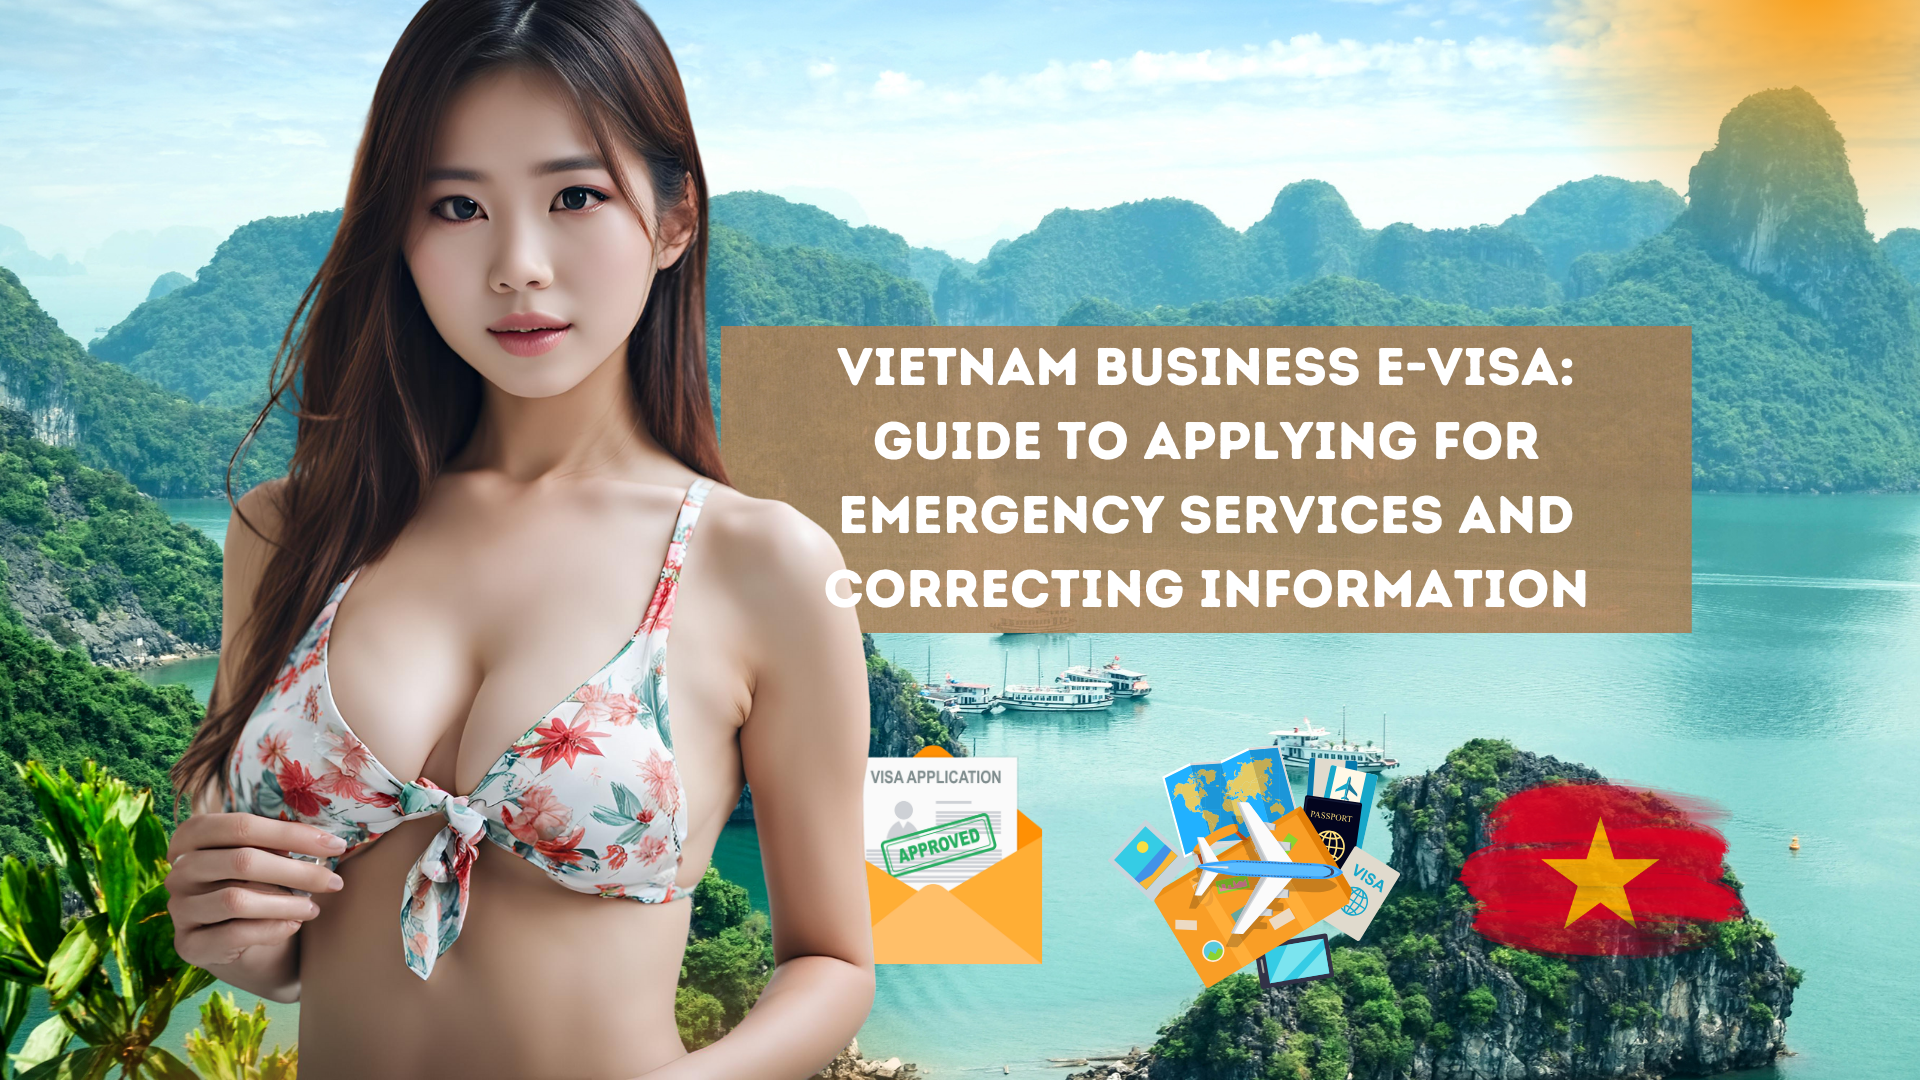 Vietnam Business e-Visa: Guide to Applying for Emergency Services and Correcting Information